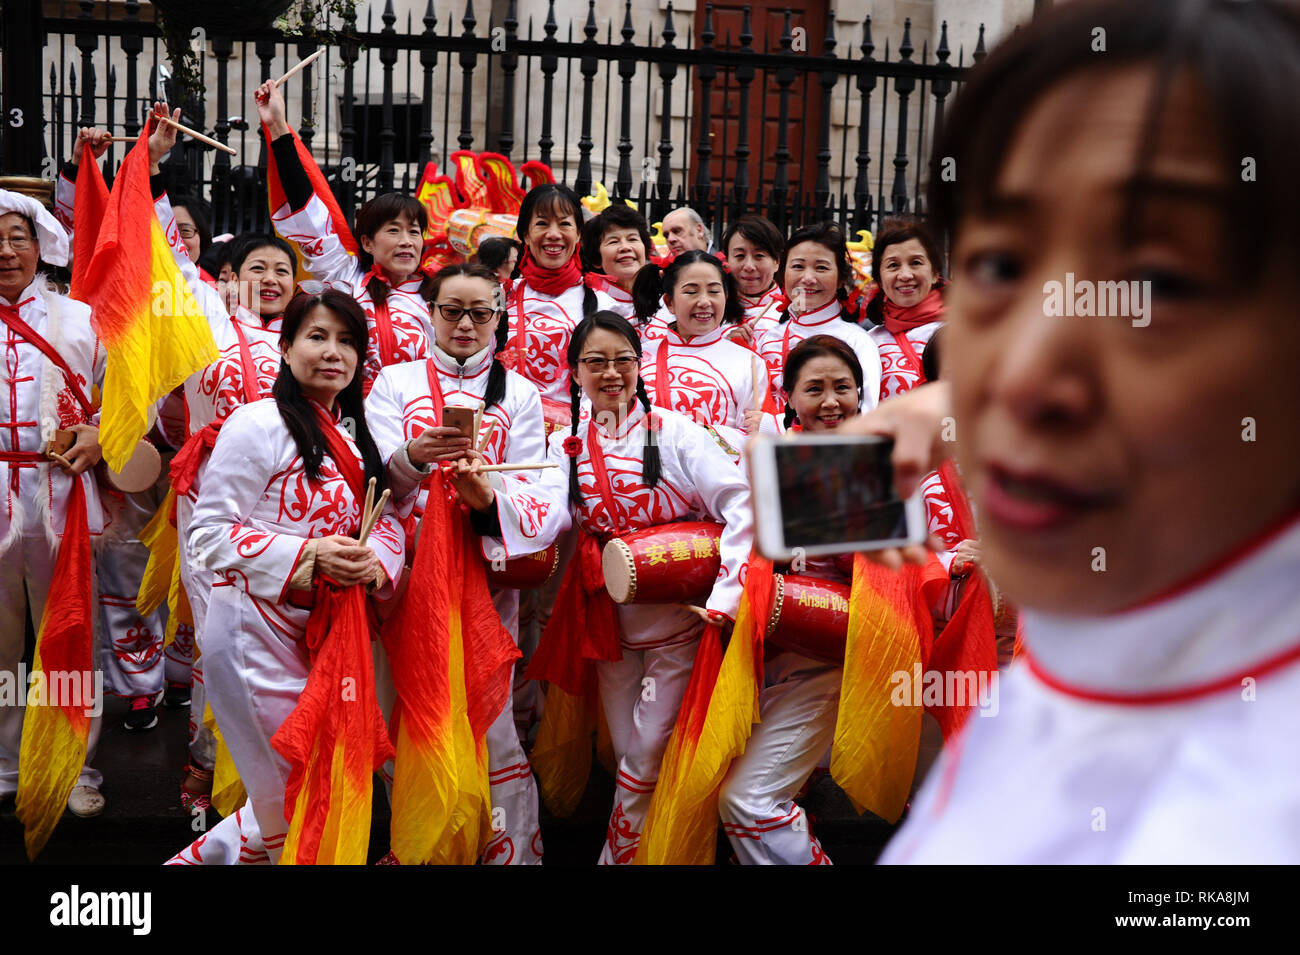 London, UK. 10th Feb, 2019. Dancers seen posing for a photo on Duncannon Street in central London during the annual Chinese New Year Parade.Chinese New Year itself and the start of the Year of the Pig fell on February 5, with London's Overseas Chinese community holding their main celebrations, including the annual parade on the 10th February. Credit: David Cliff/SOPA Images/ZUMA Wire/Alamy Live News Stock Photo